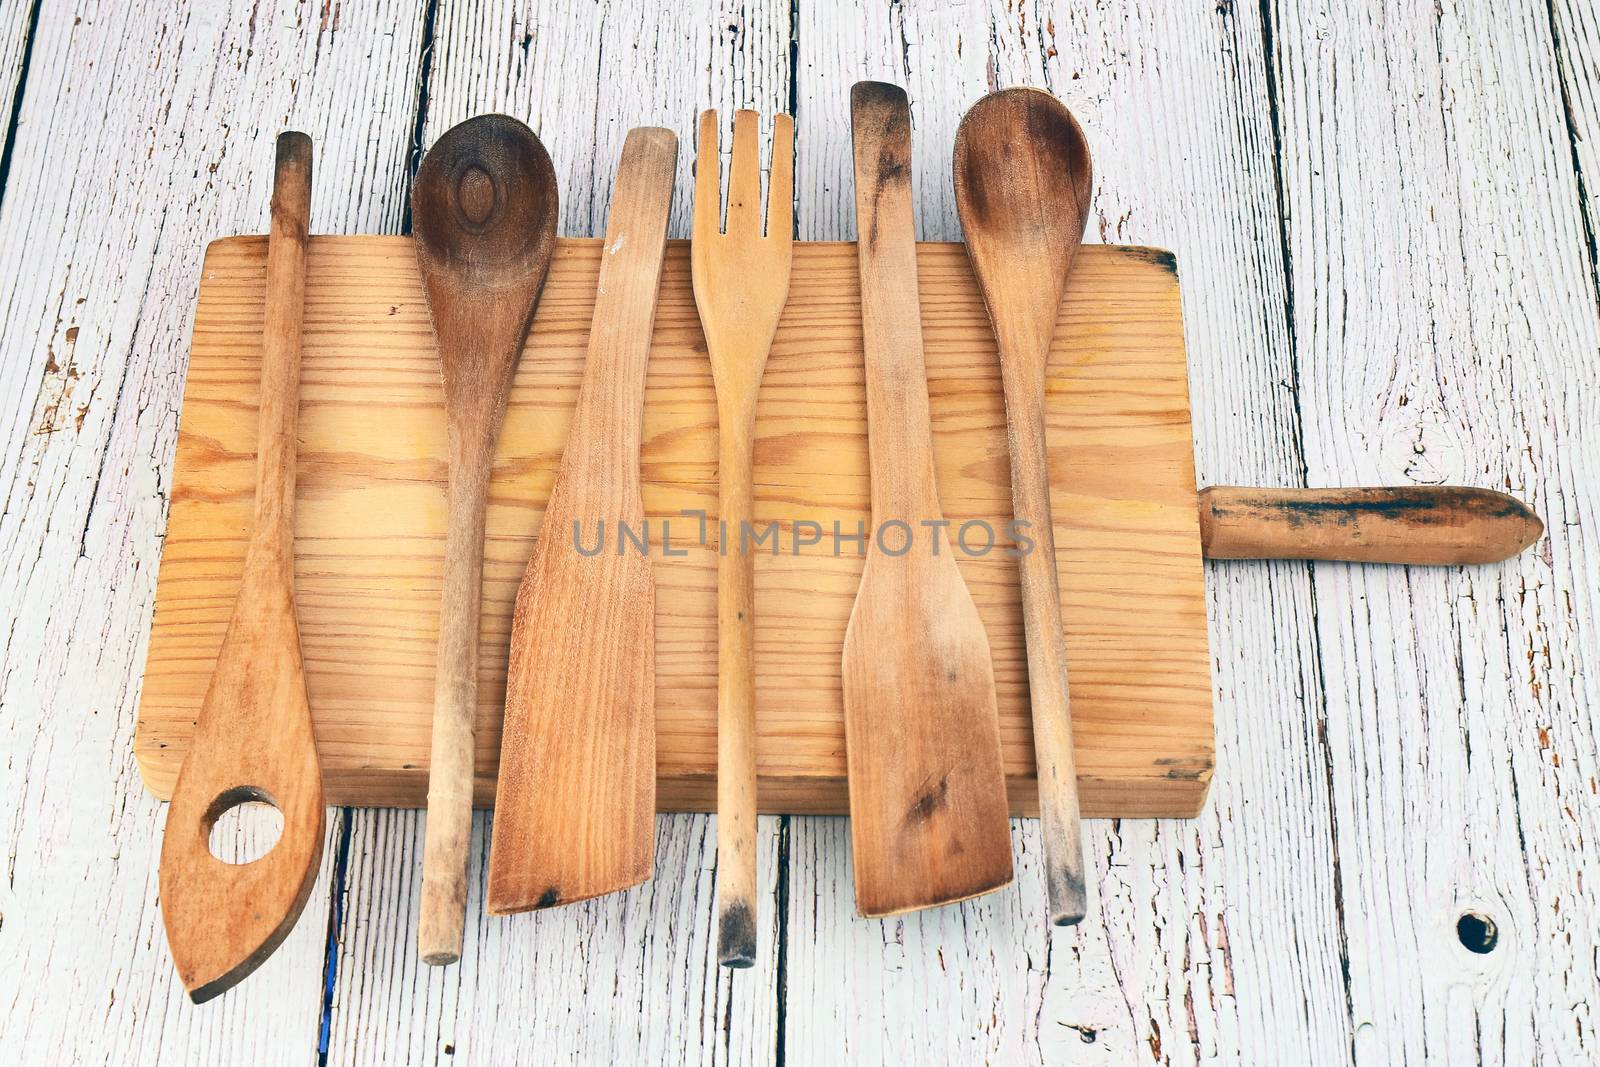 traditional and widely used wooden cutlery